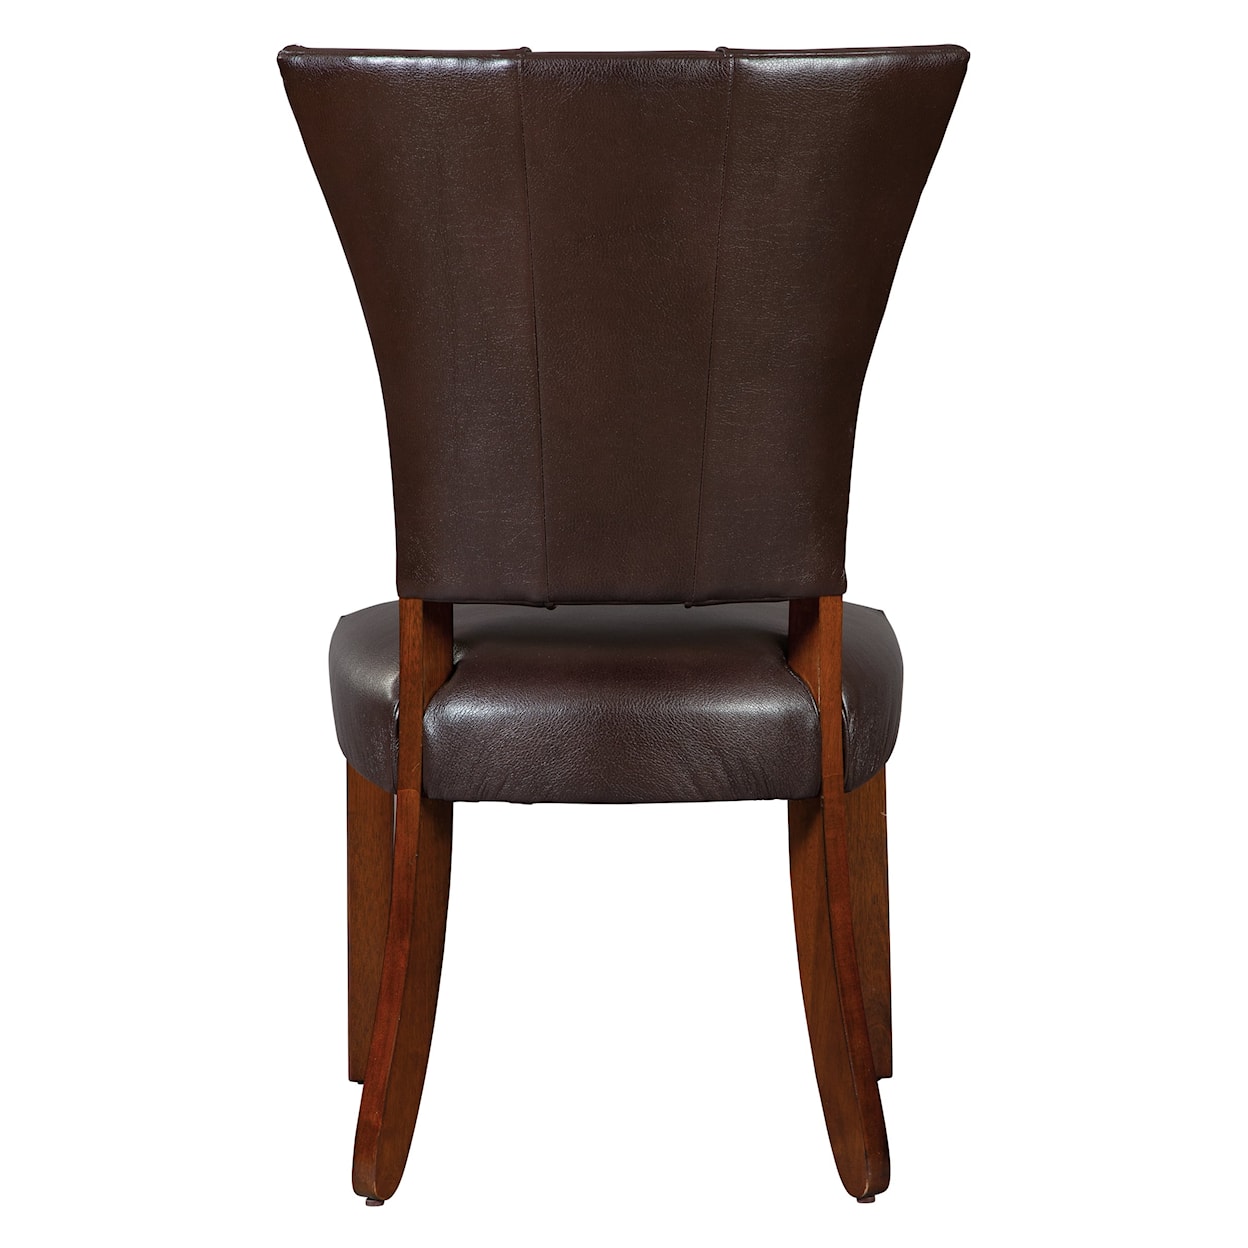 Hekman Upholstery Willis Dining Chair